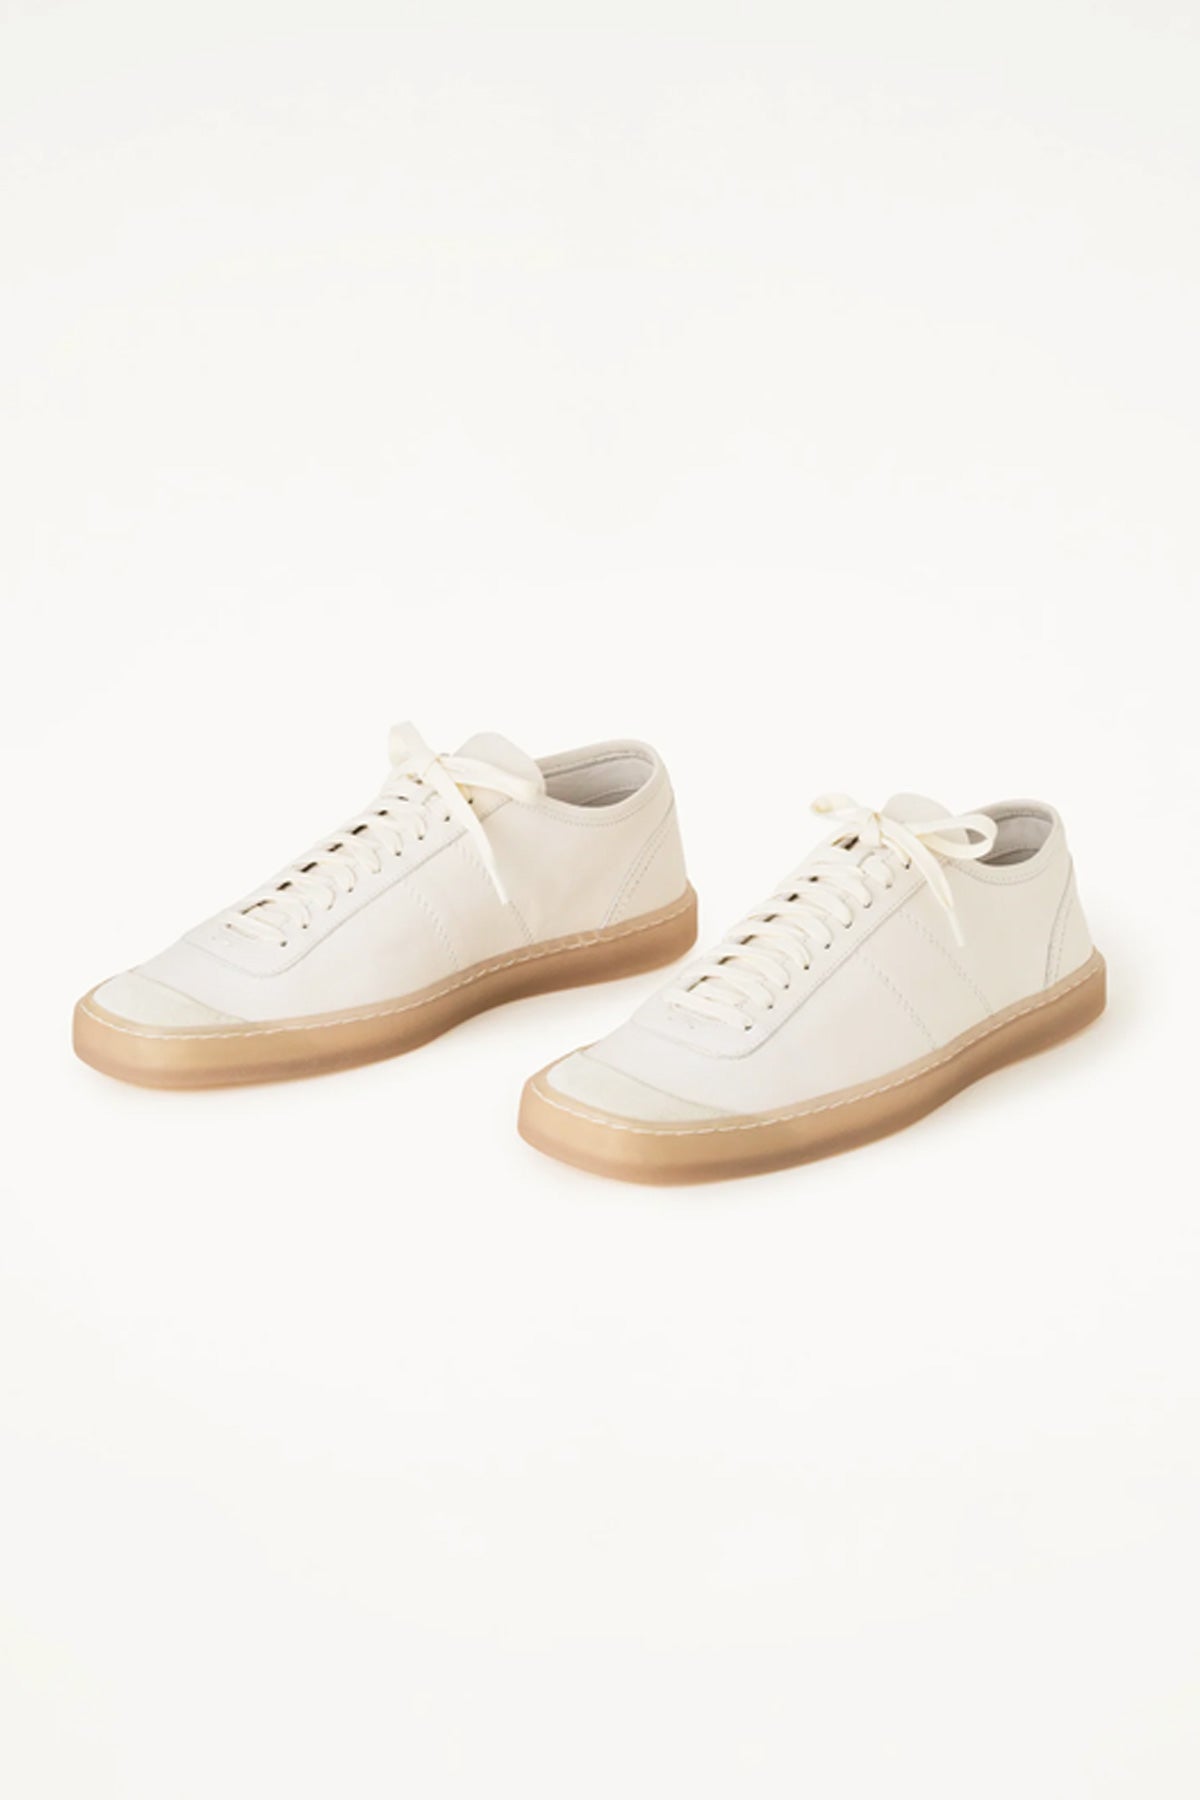 Linoleum Basic Laced Up Trainers - Clay White